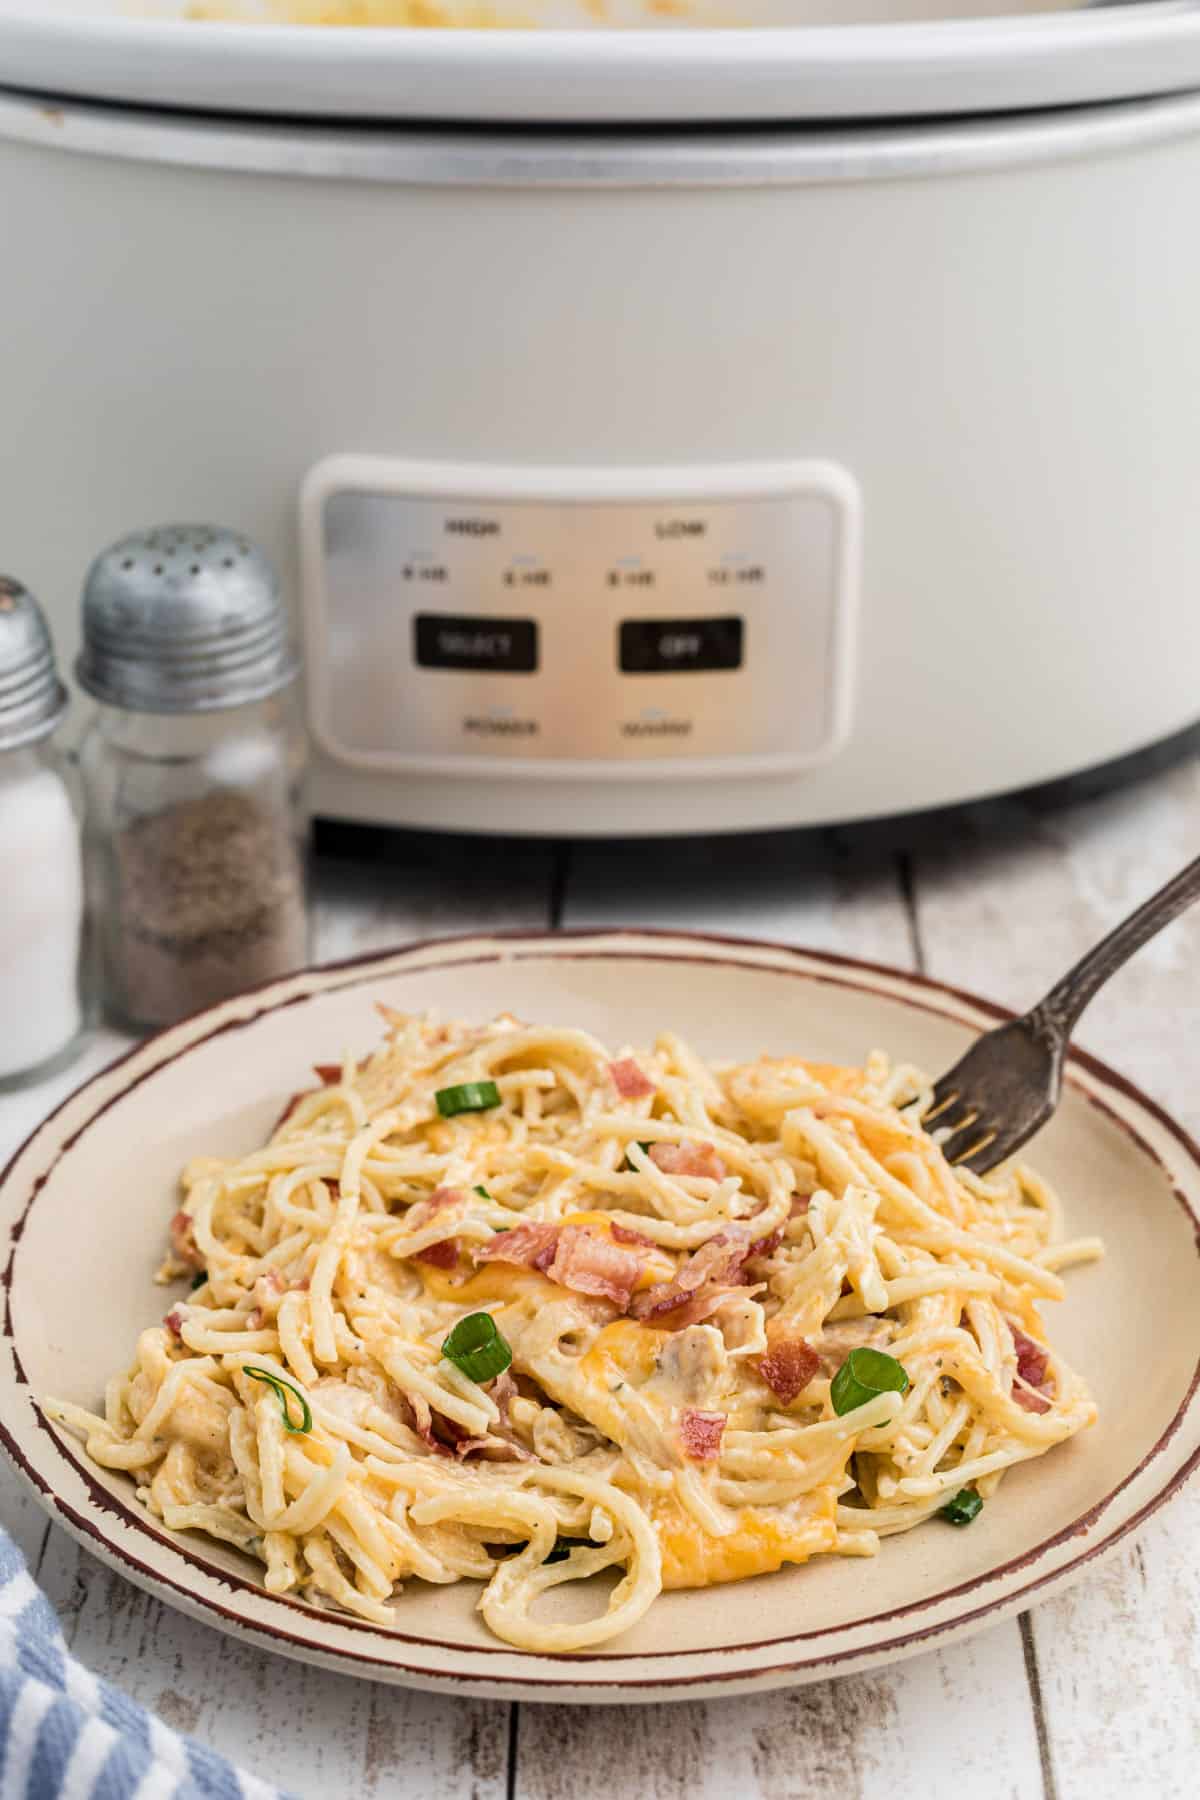 A plated crock pot ranch chicken spaghetti on a plate.